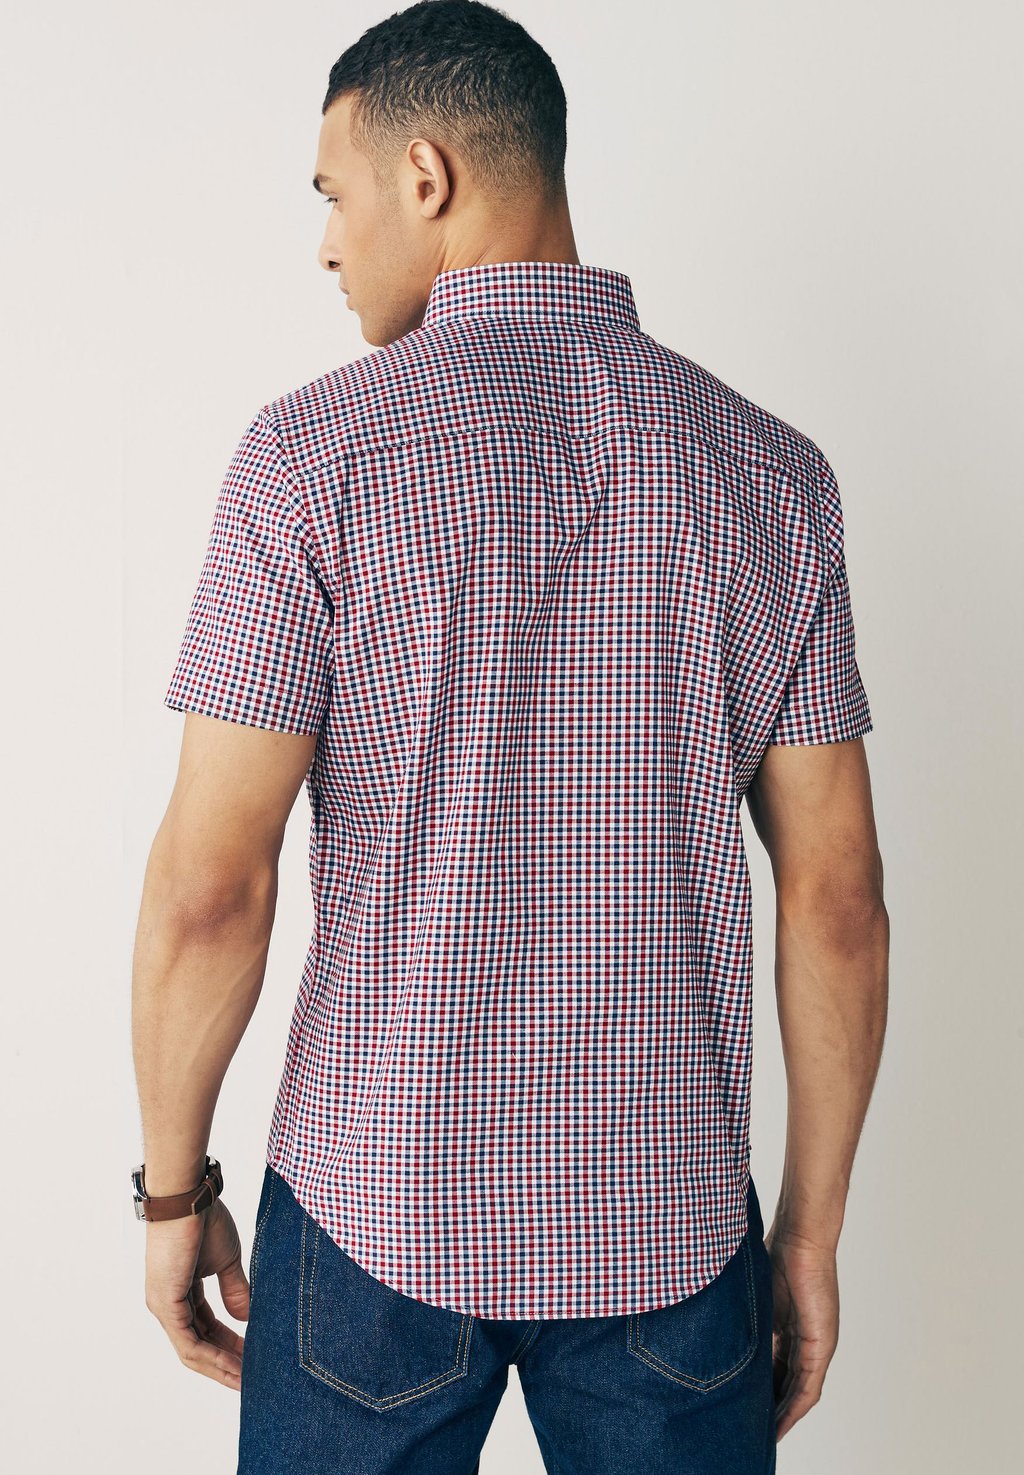 Рубашка EASY IRON BUTTON DOWN OXFORD Next, цвет red navy blue gingham check